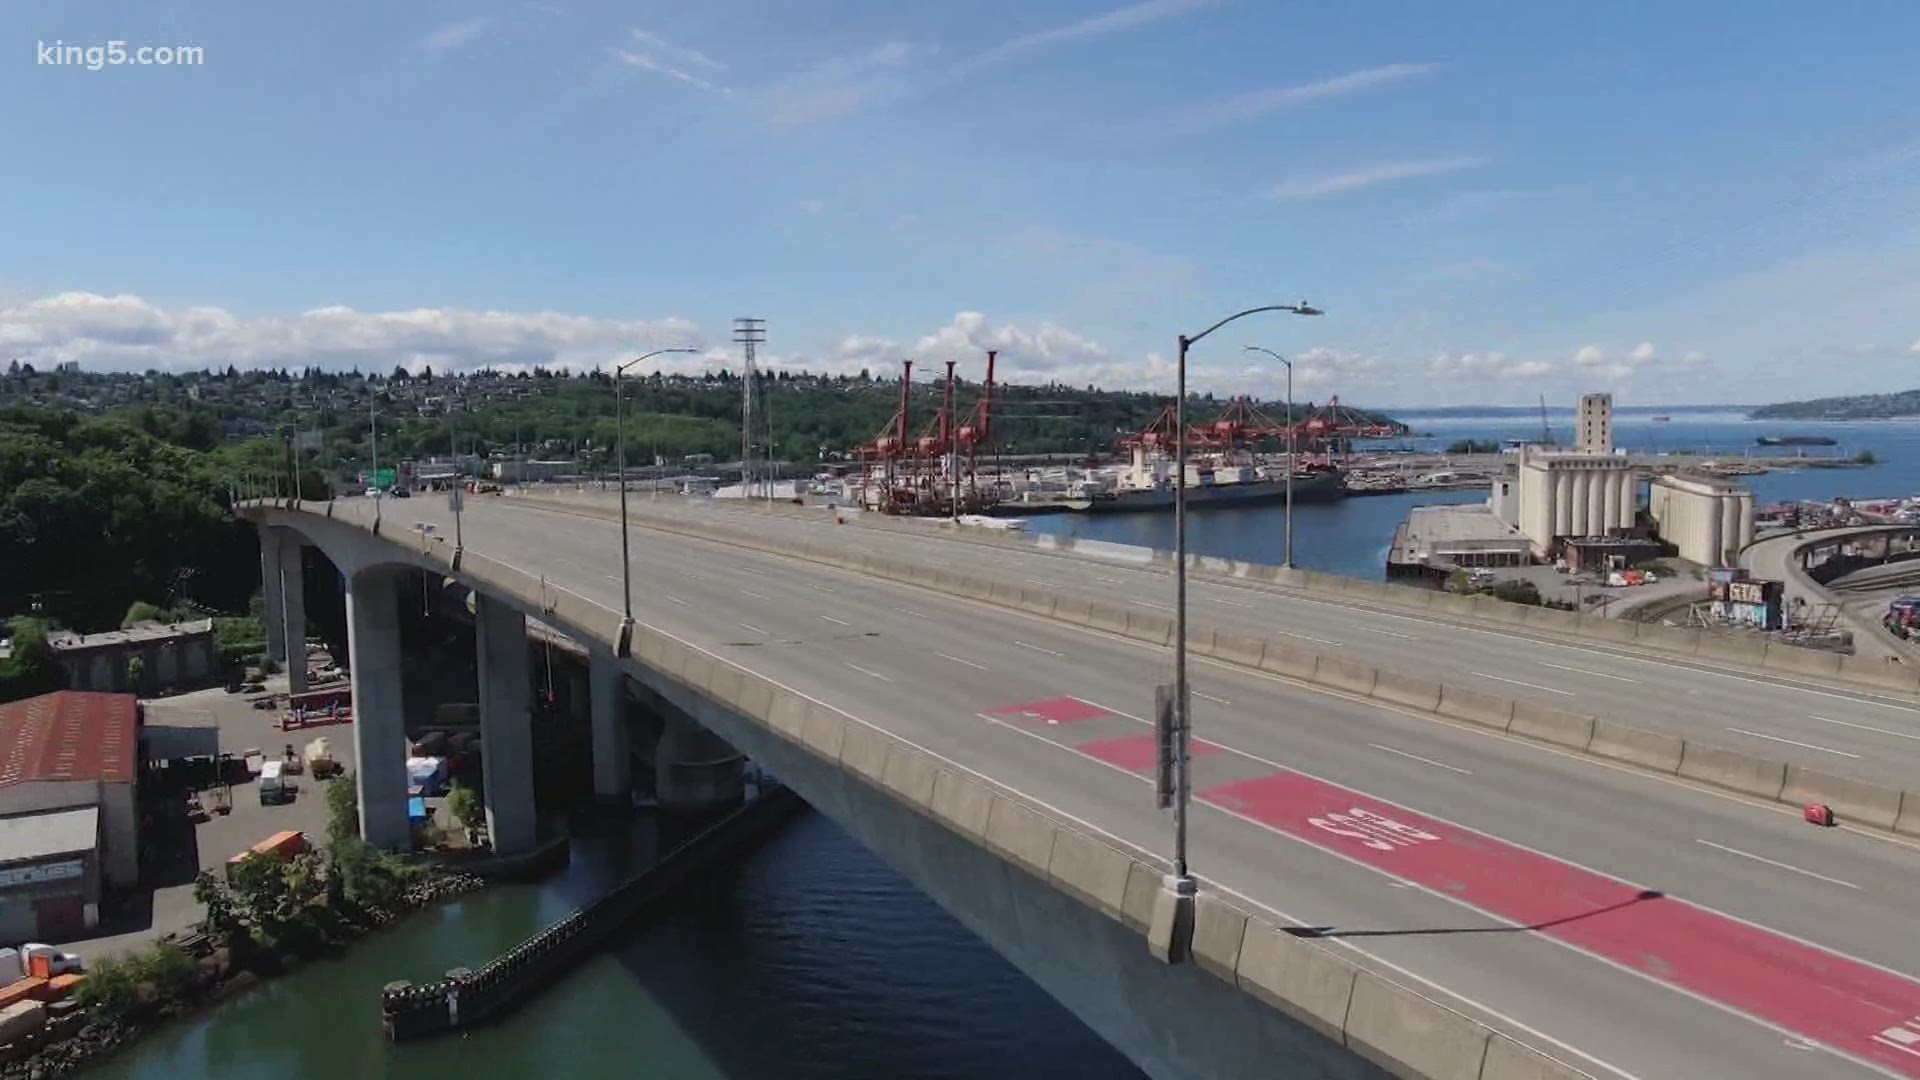 Wednesday afternoon, the West Seattle Bridge Advisory Task Force received an update on the bridge which has been closed since March 23.